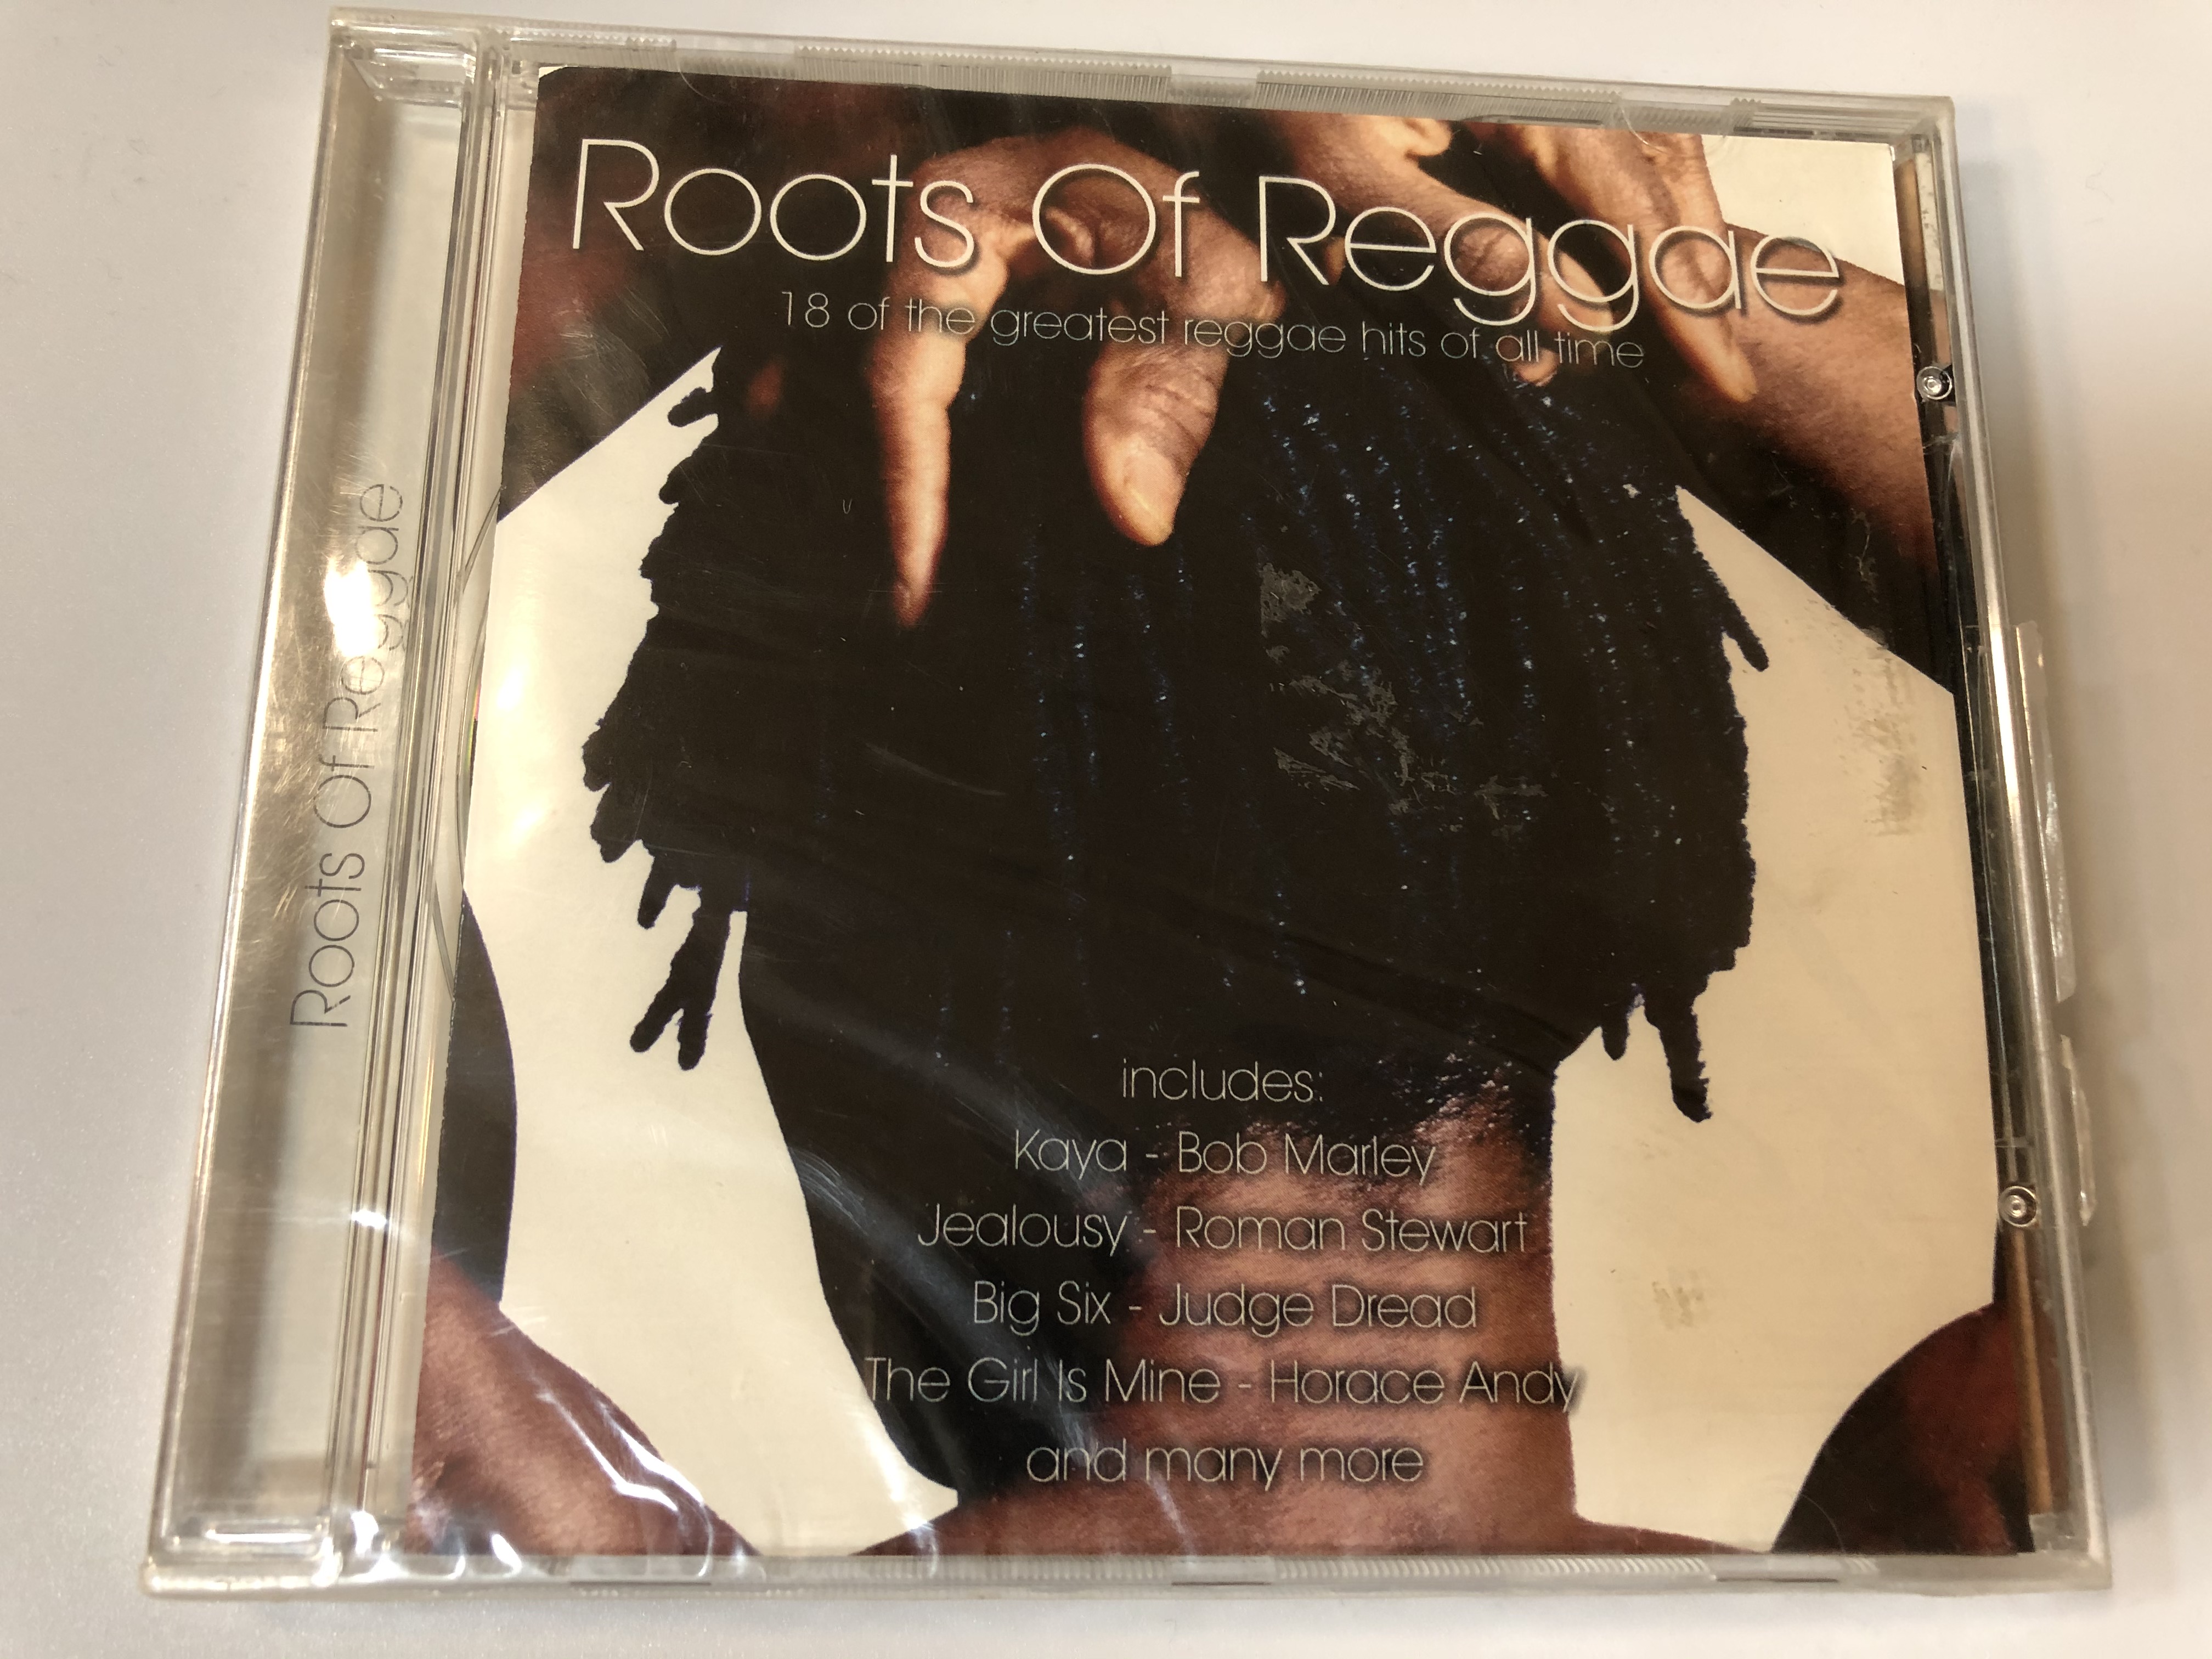 roots-of-reggae-18-of-the-greatest-reggae-hits-of-all-time-includes-kaya-bob-marley-jealousy-roman-stewart-big-six-judge-dread-the-girl-is-mine-horace-andy-and-many-more-time-mu-1-.jpg